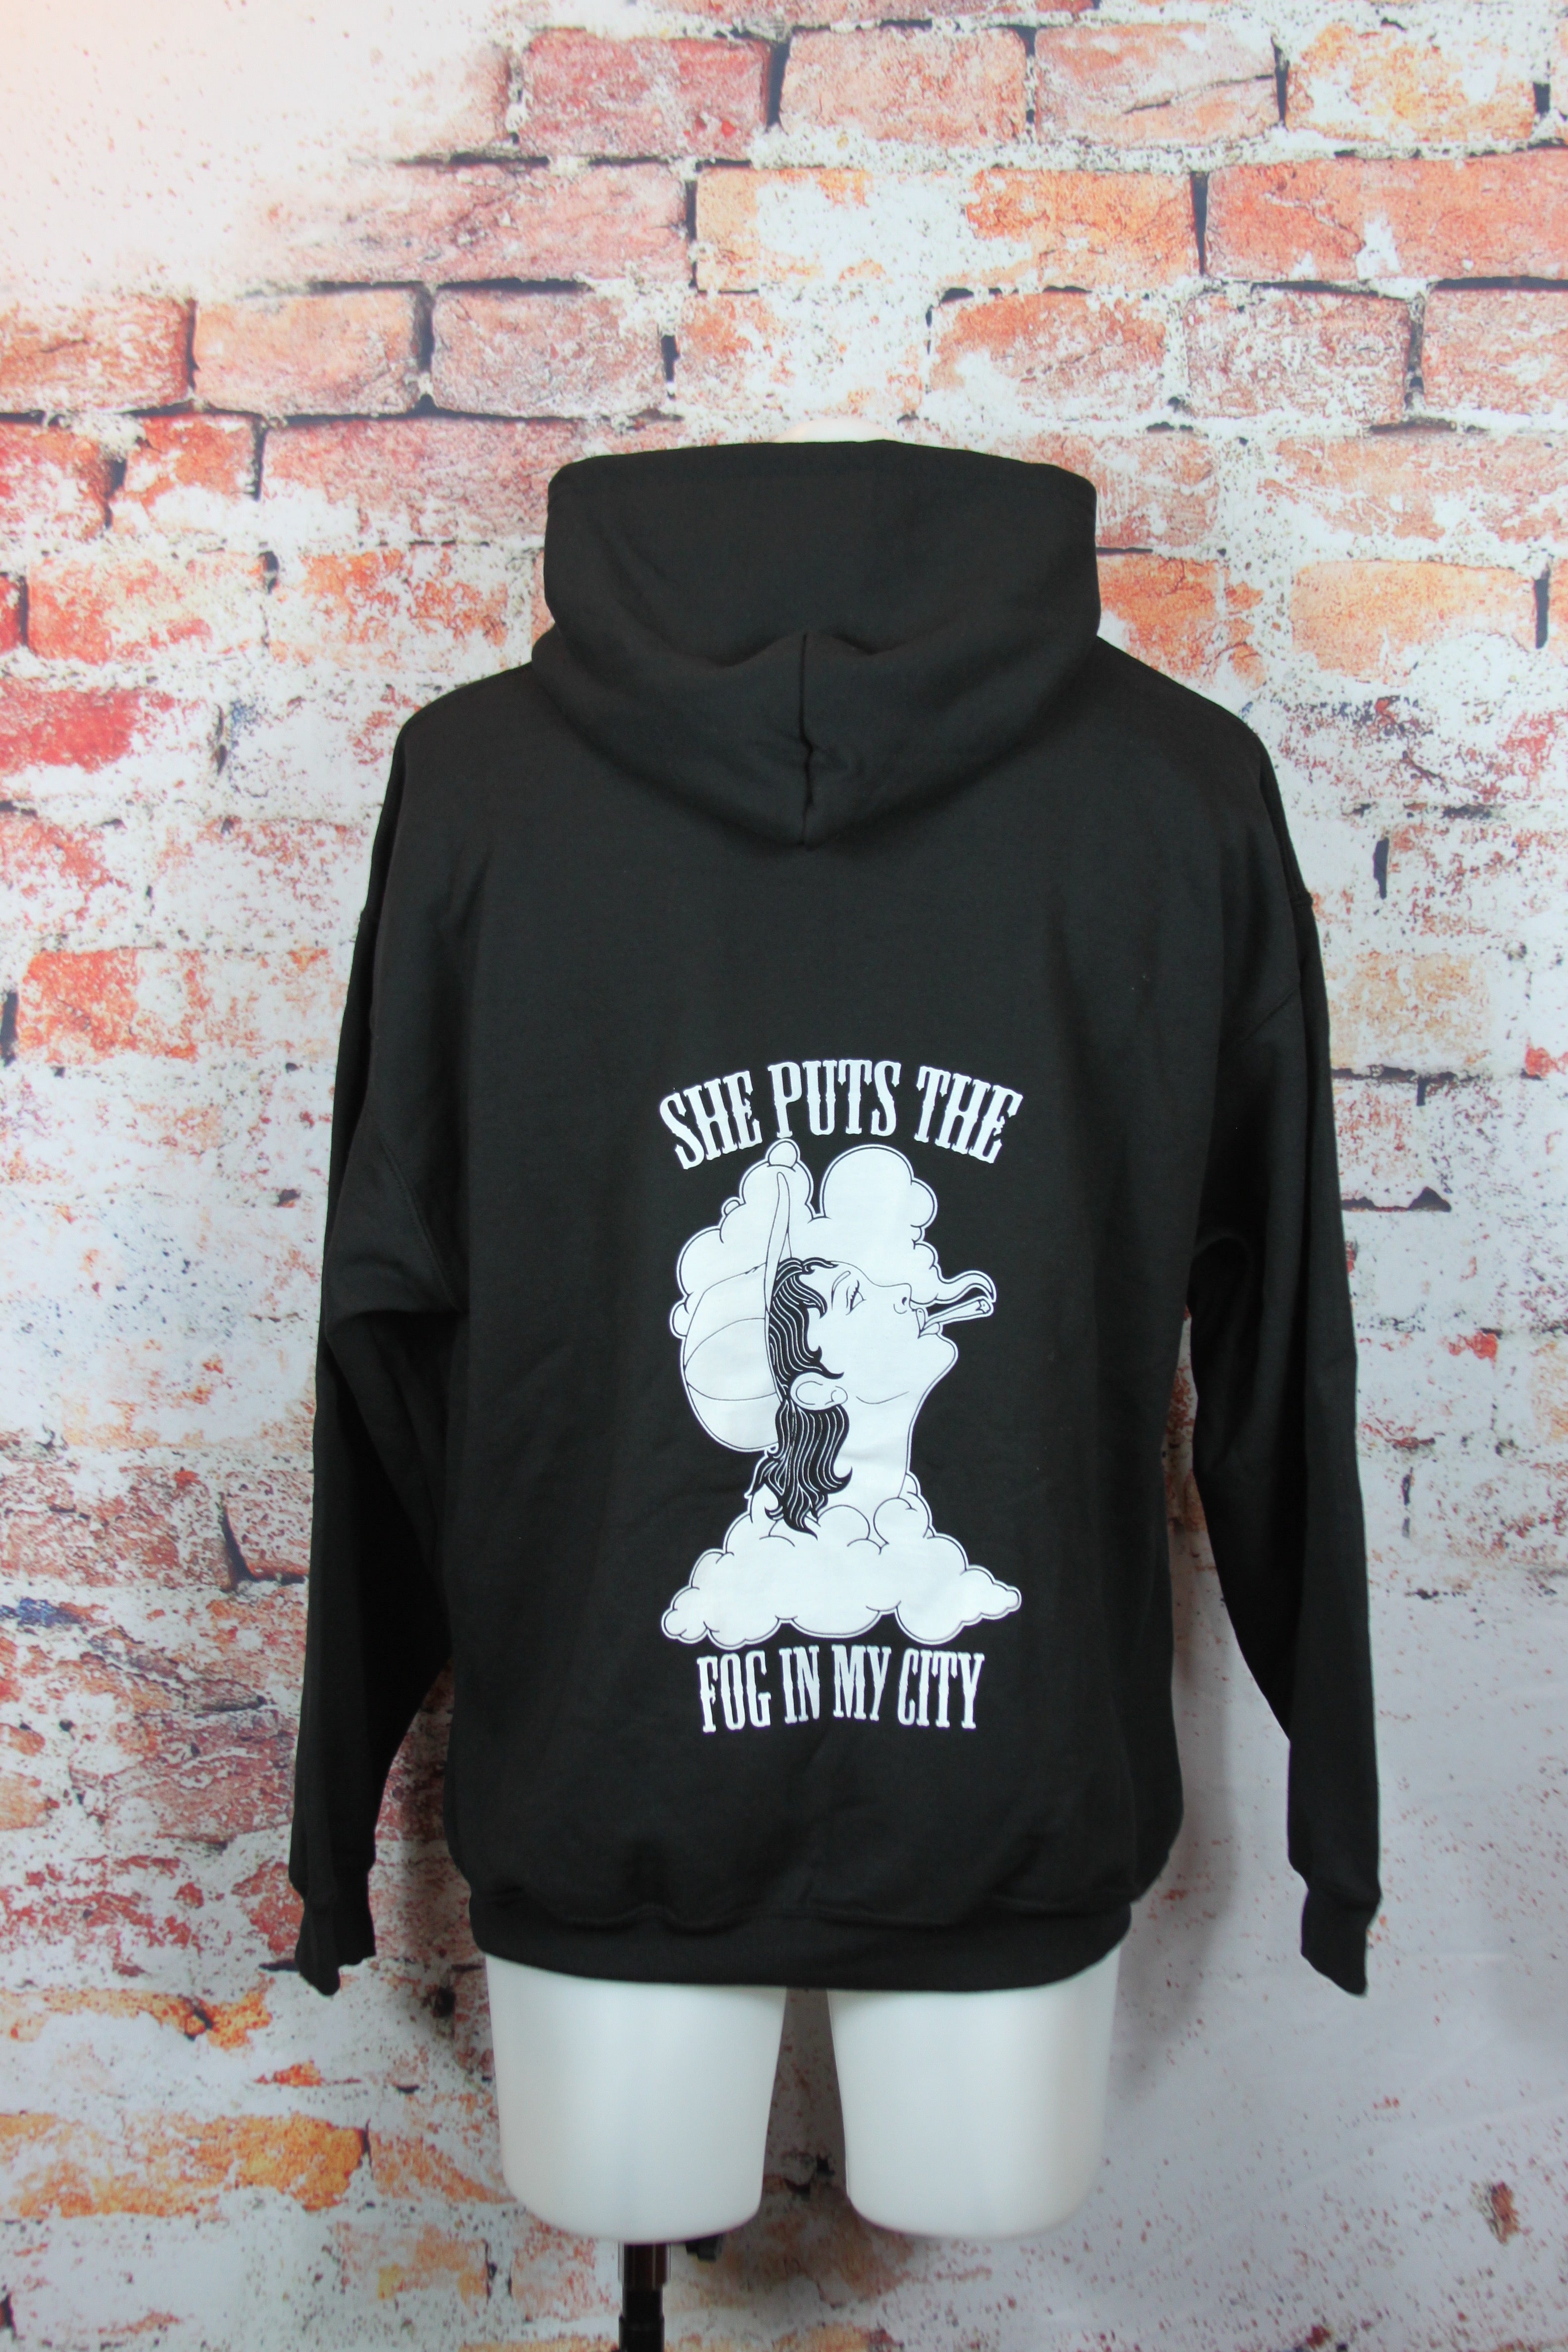 She Puts the Fog in My City Zip Up Hoodie